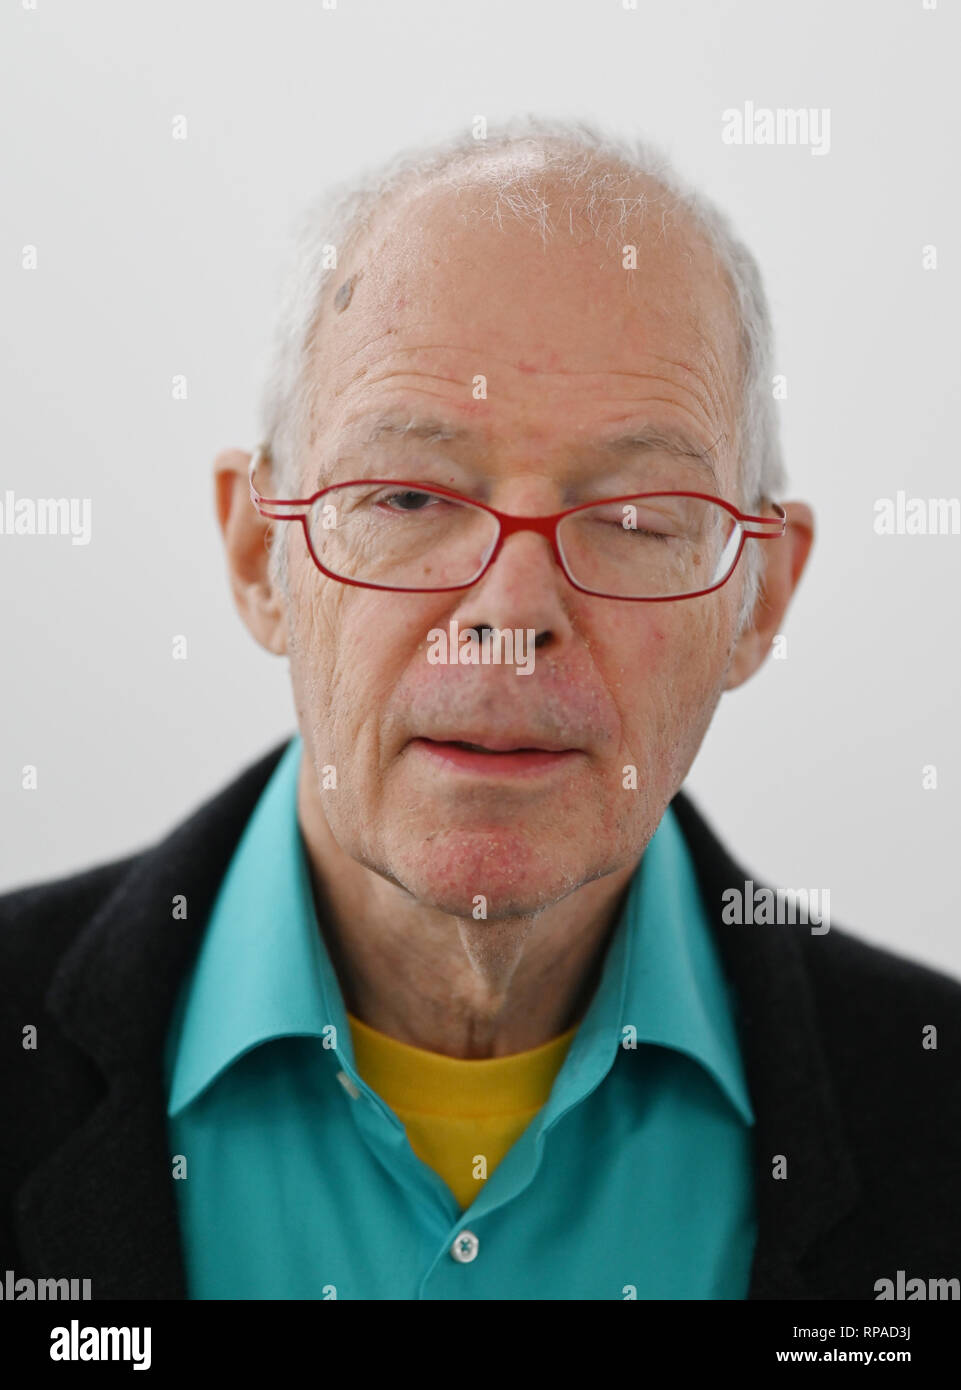 Page 3 - Max Bill High Resolution Stock Photography and Images - Alamy